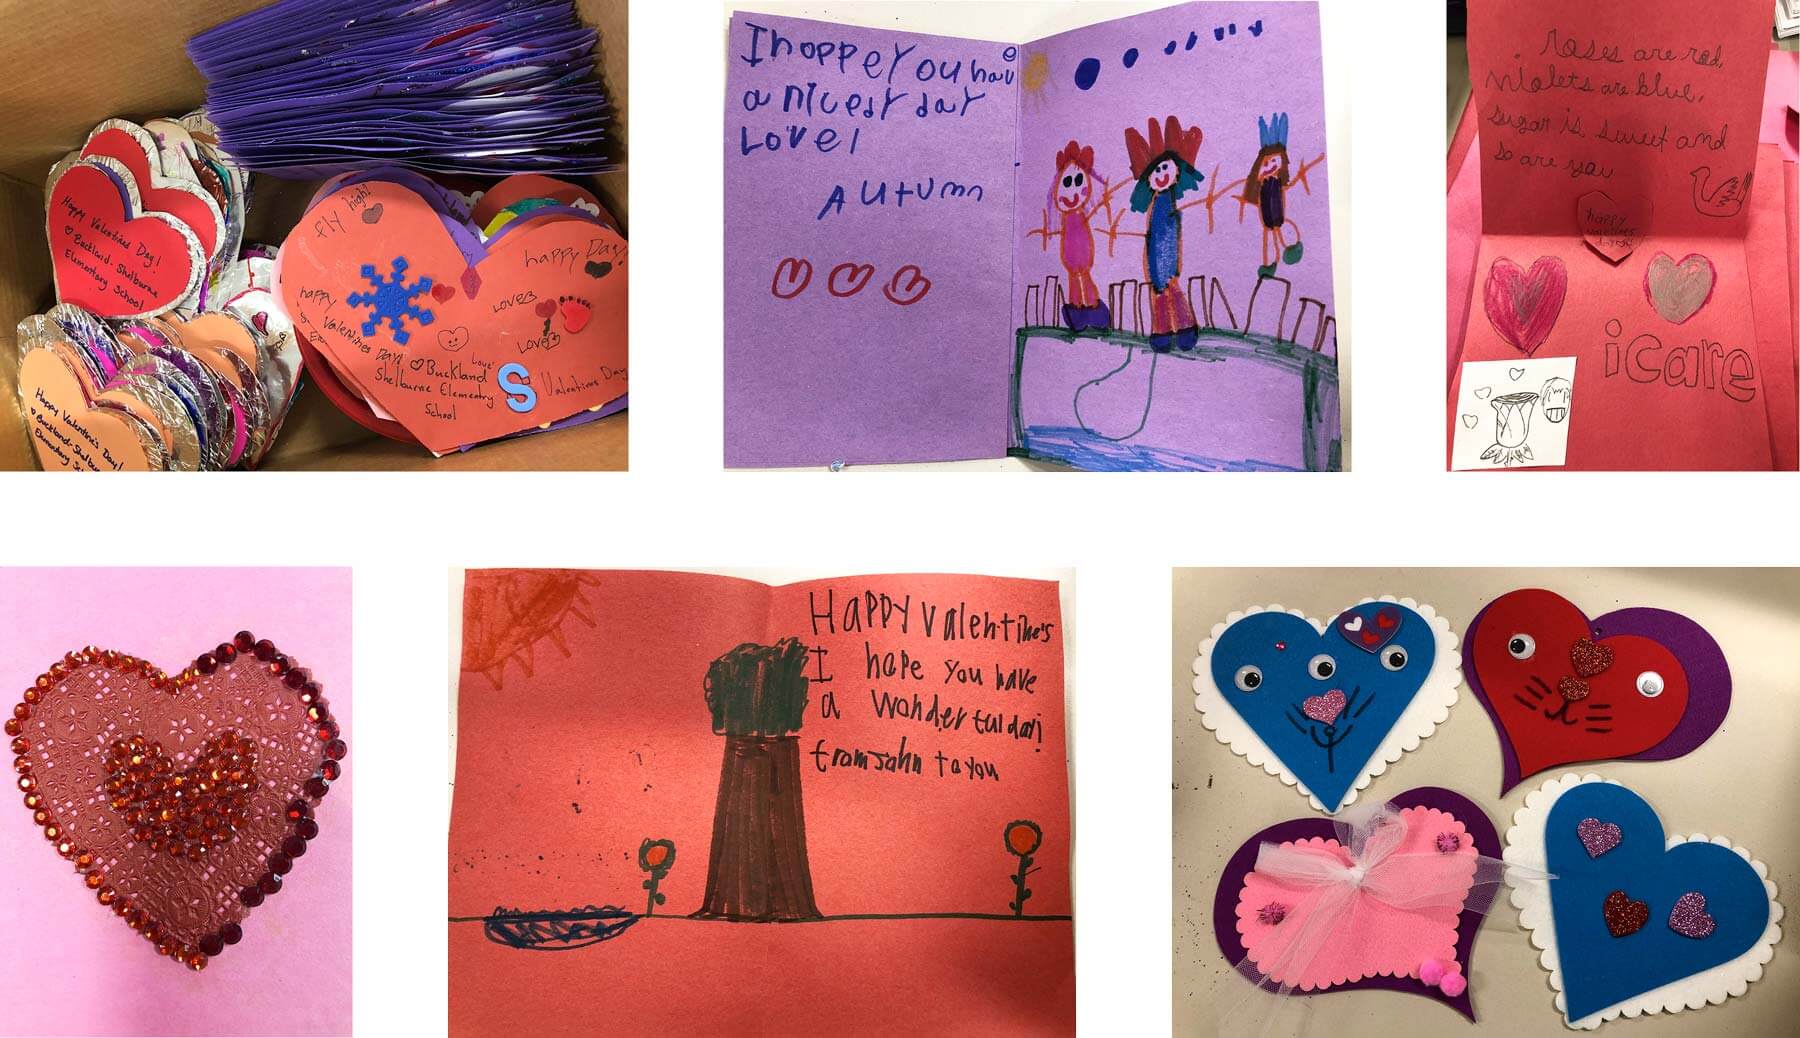 Handmade valentines for Meals on Wheels recipients